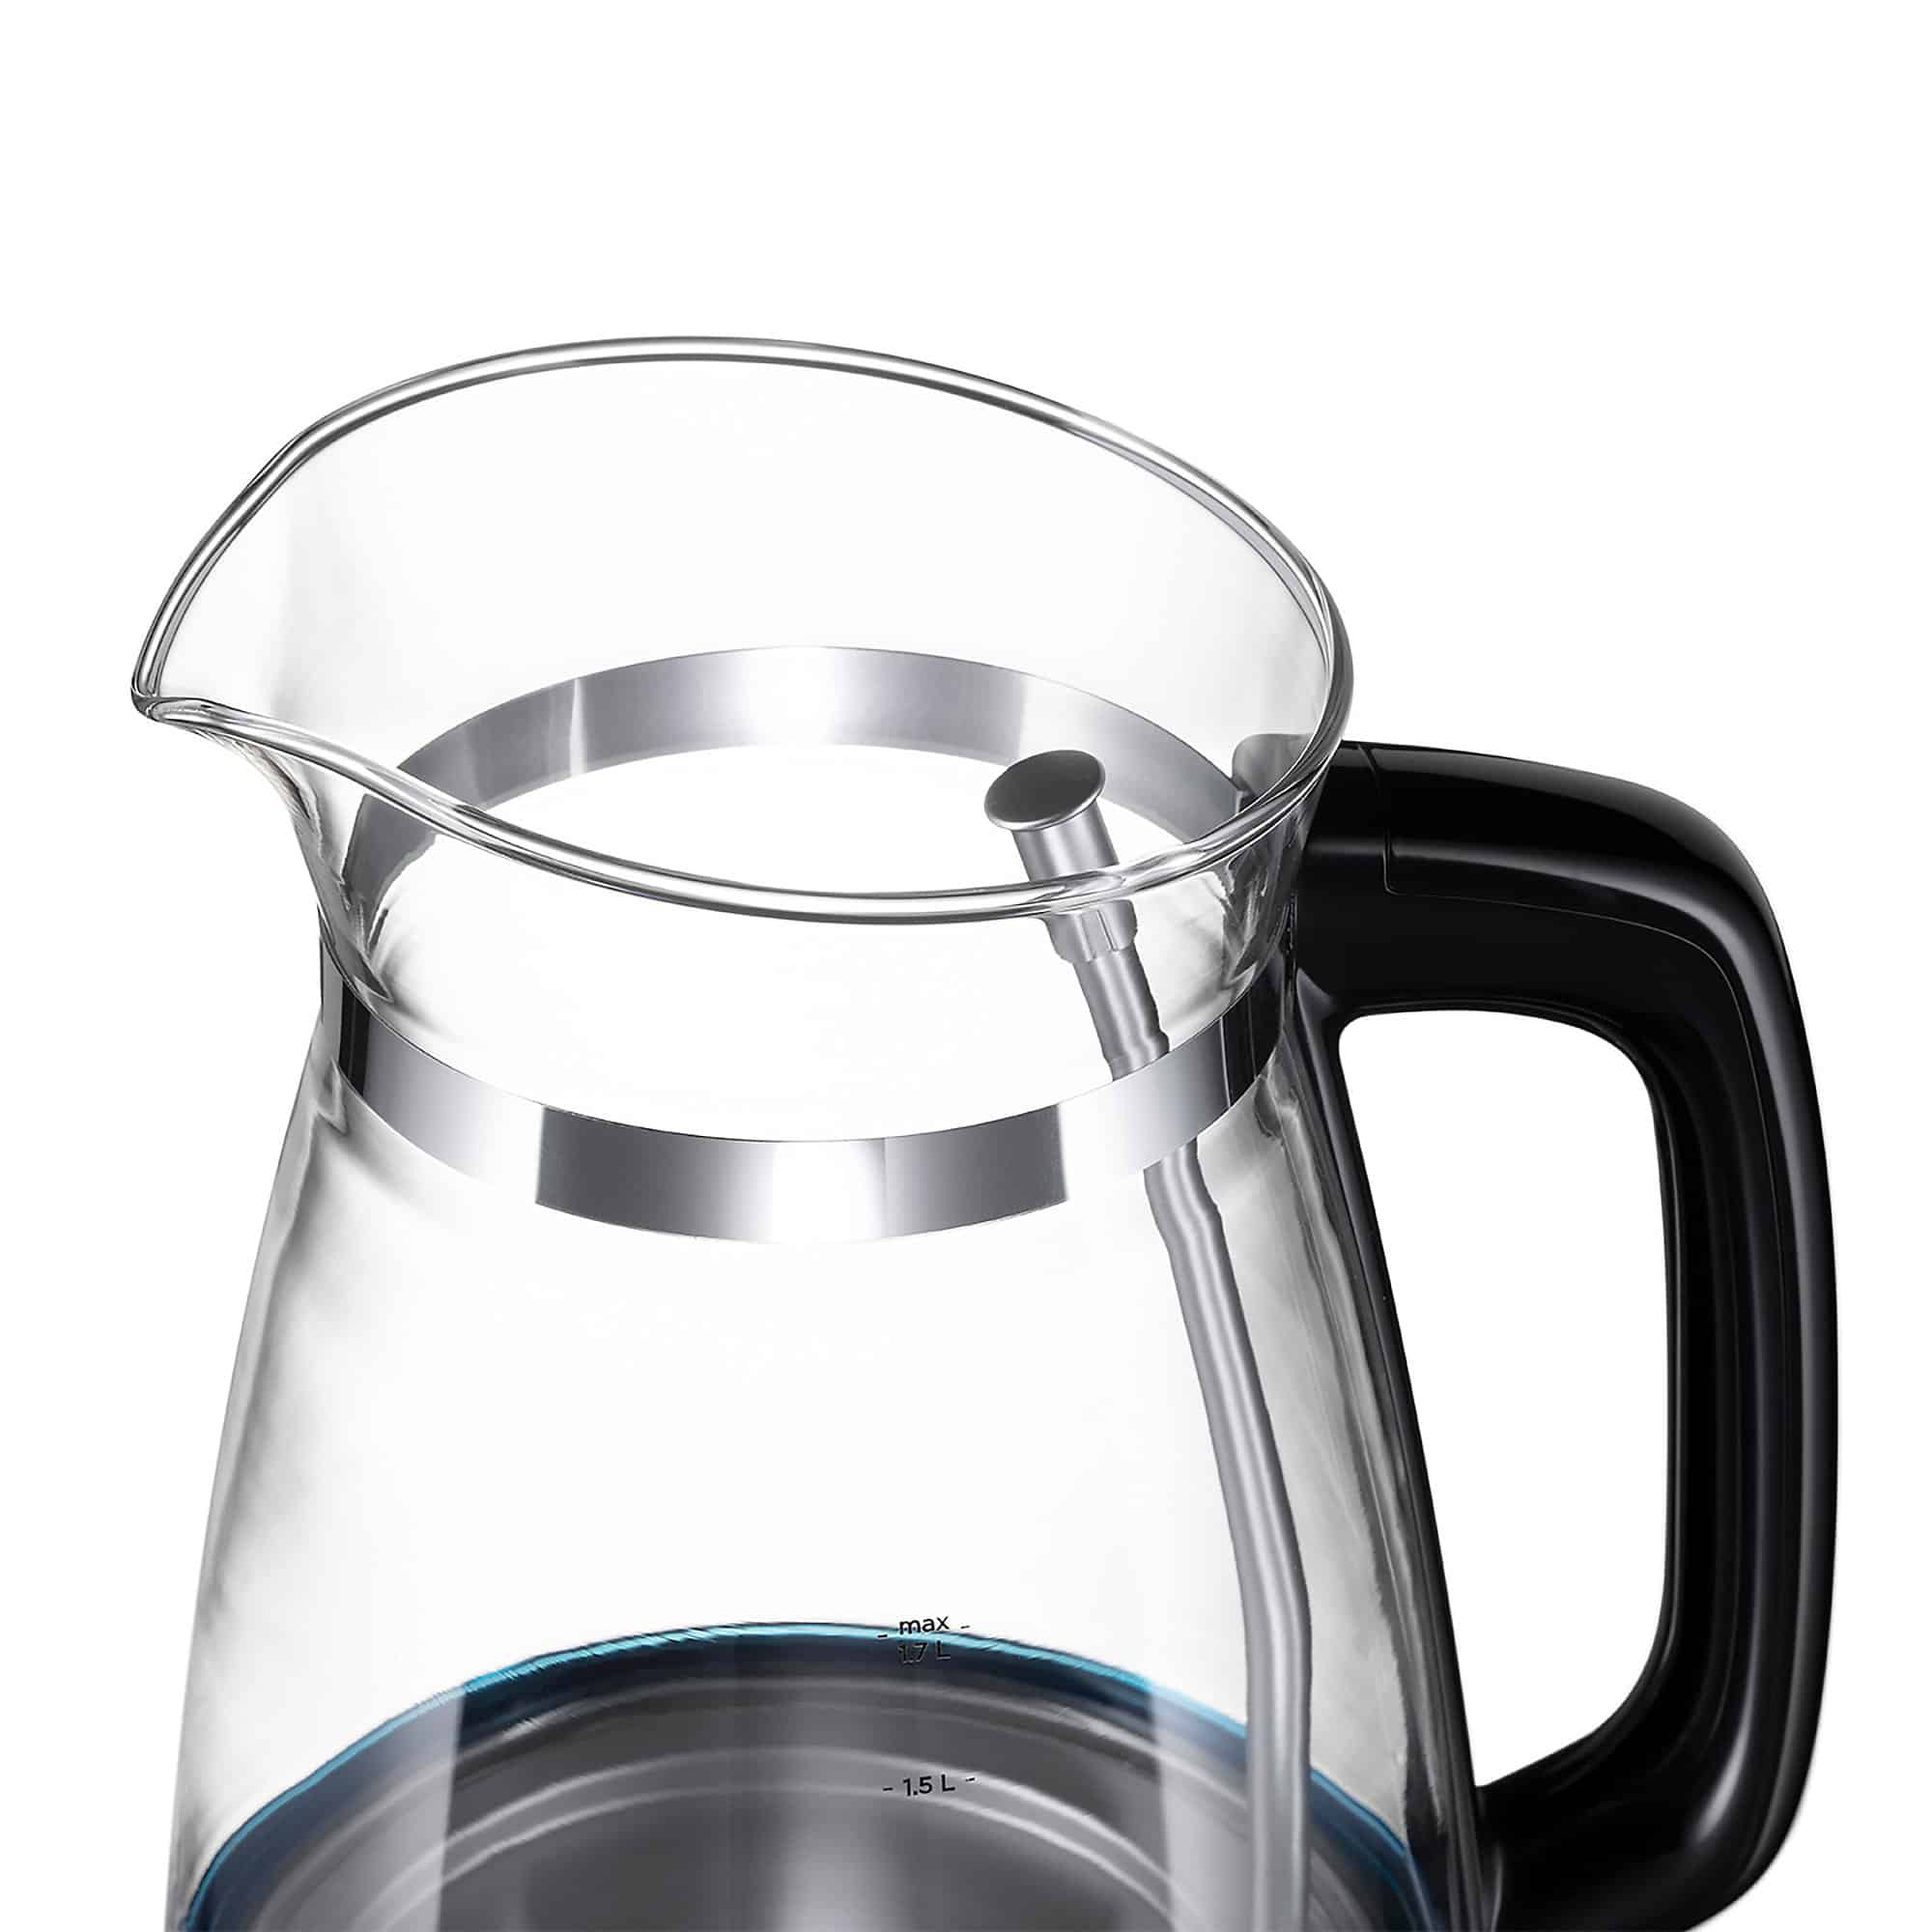 Russell Hobbs  Kettle-Clear-0586